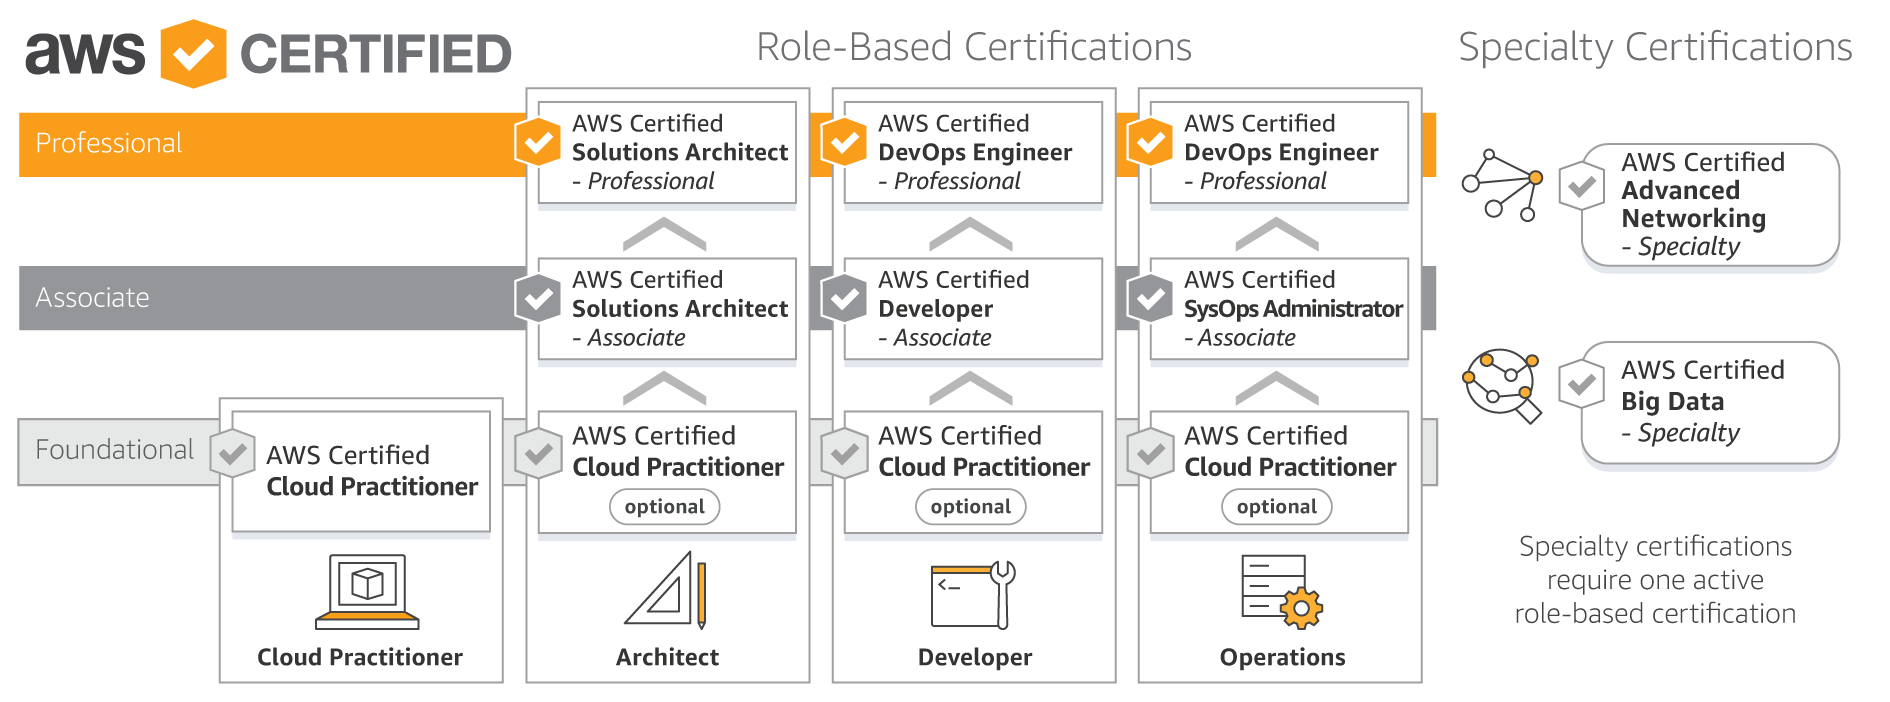 Role-Based Certifications